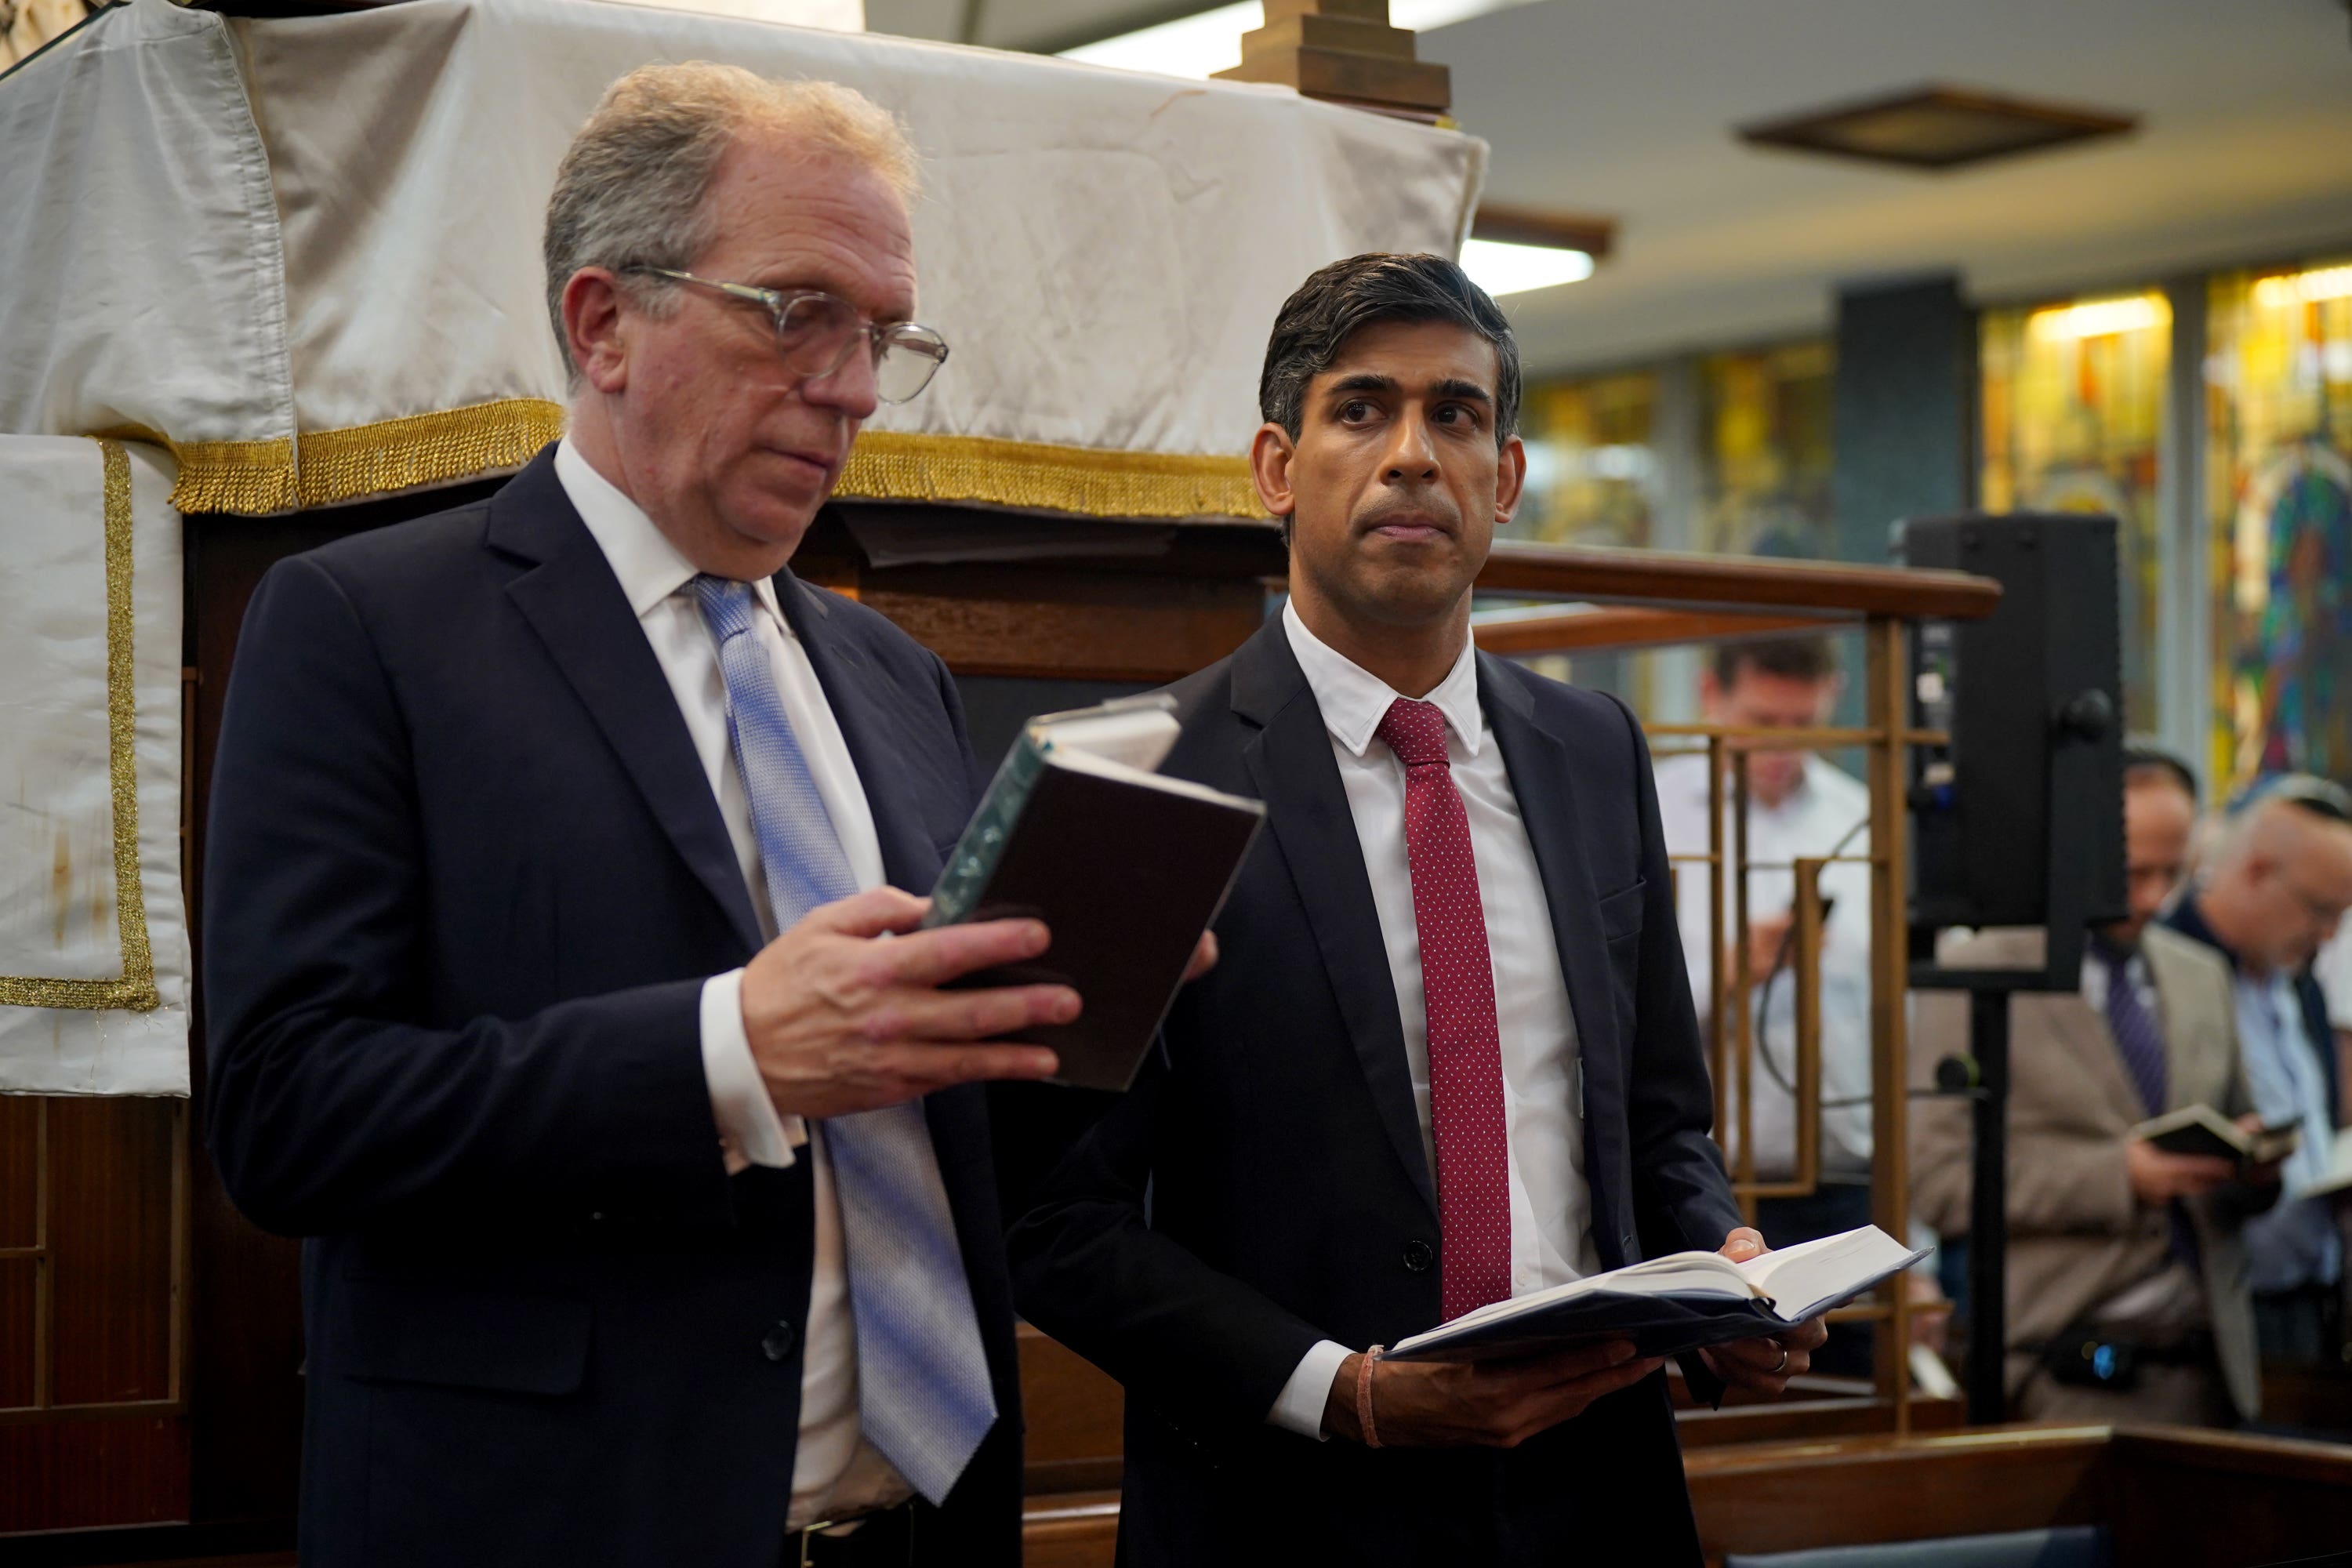 Prime Minister Rishi Sunak visited a synagogue on Monday to join in with prayers for victims of the Hamas attack.